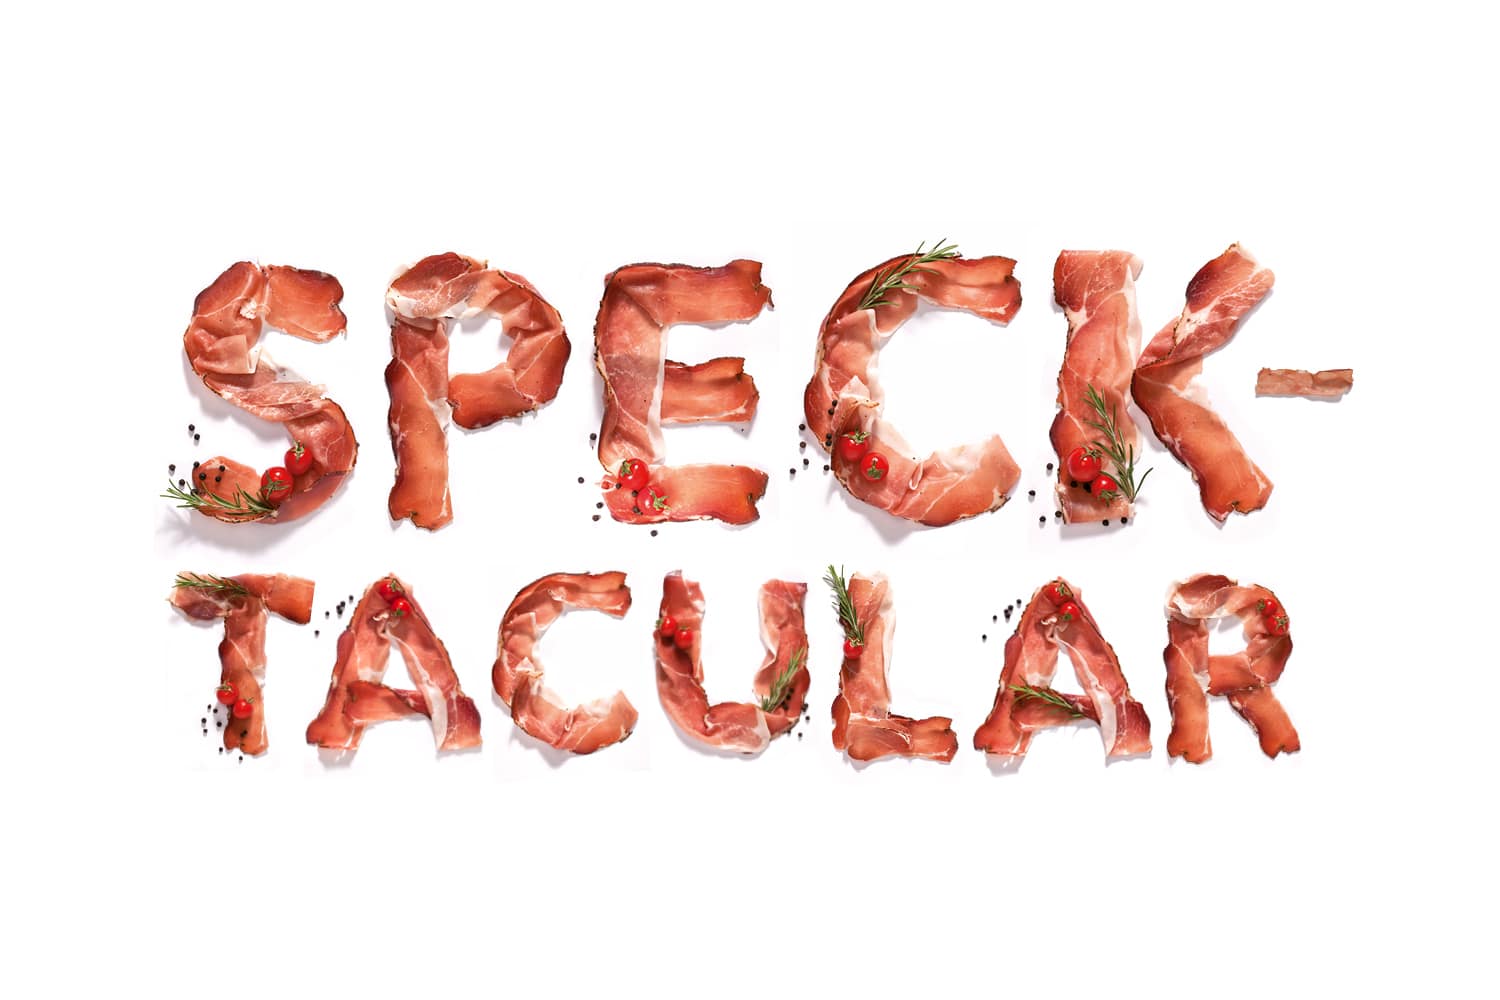 The SpeckFont